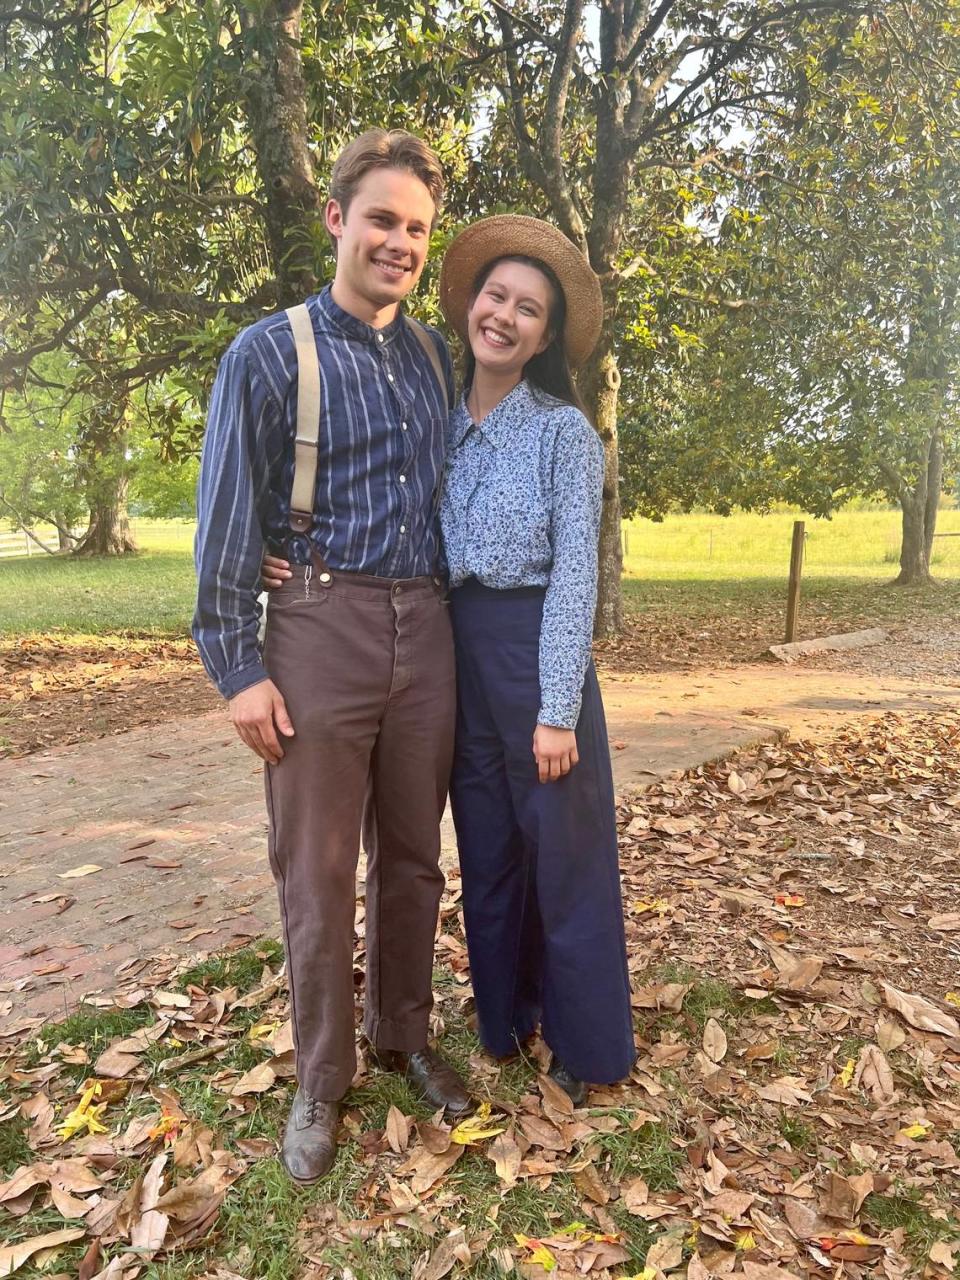 Logan Shroyer (John-Boy) and Vivian Lee-Boulton (Edith) pose in May 2022 for a photo on the set of “A Walton’s Thanksgiving” in Georgia.